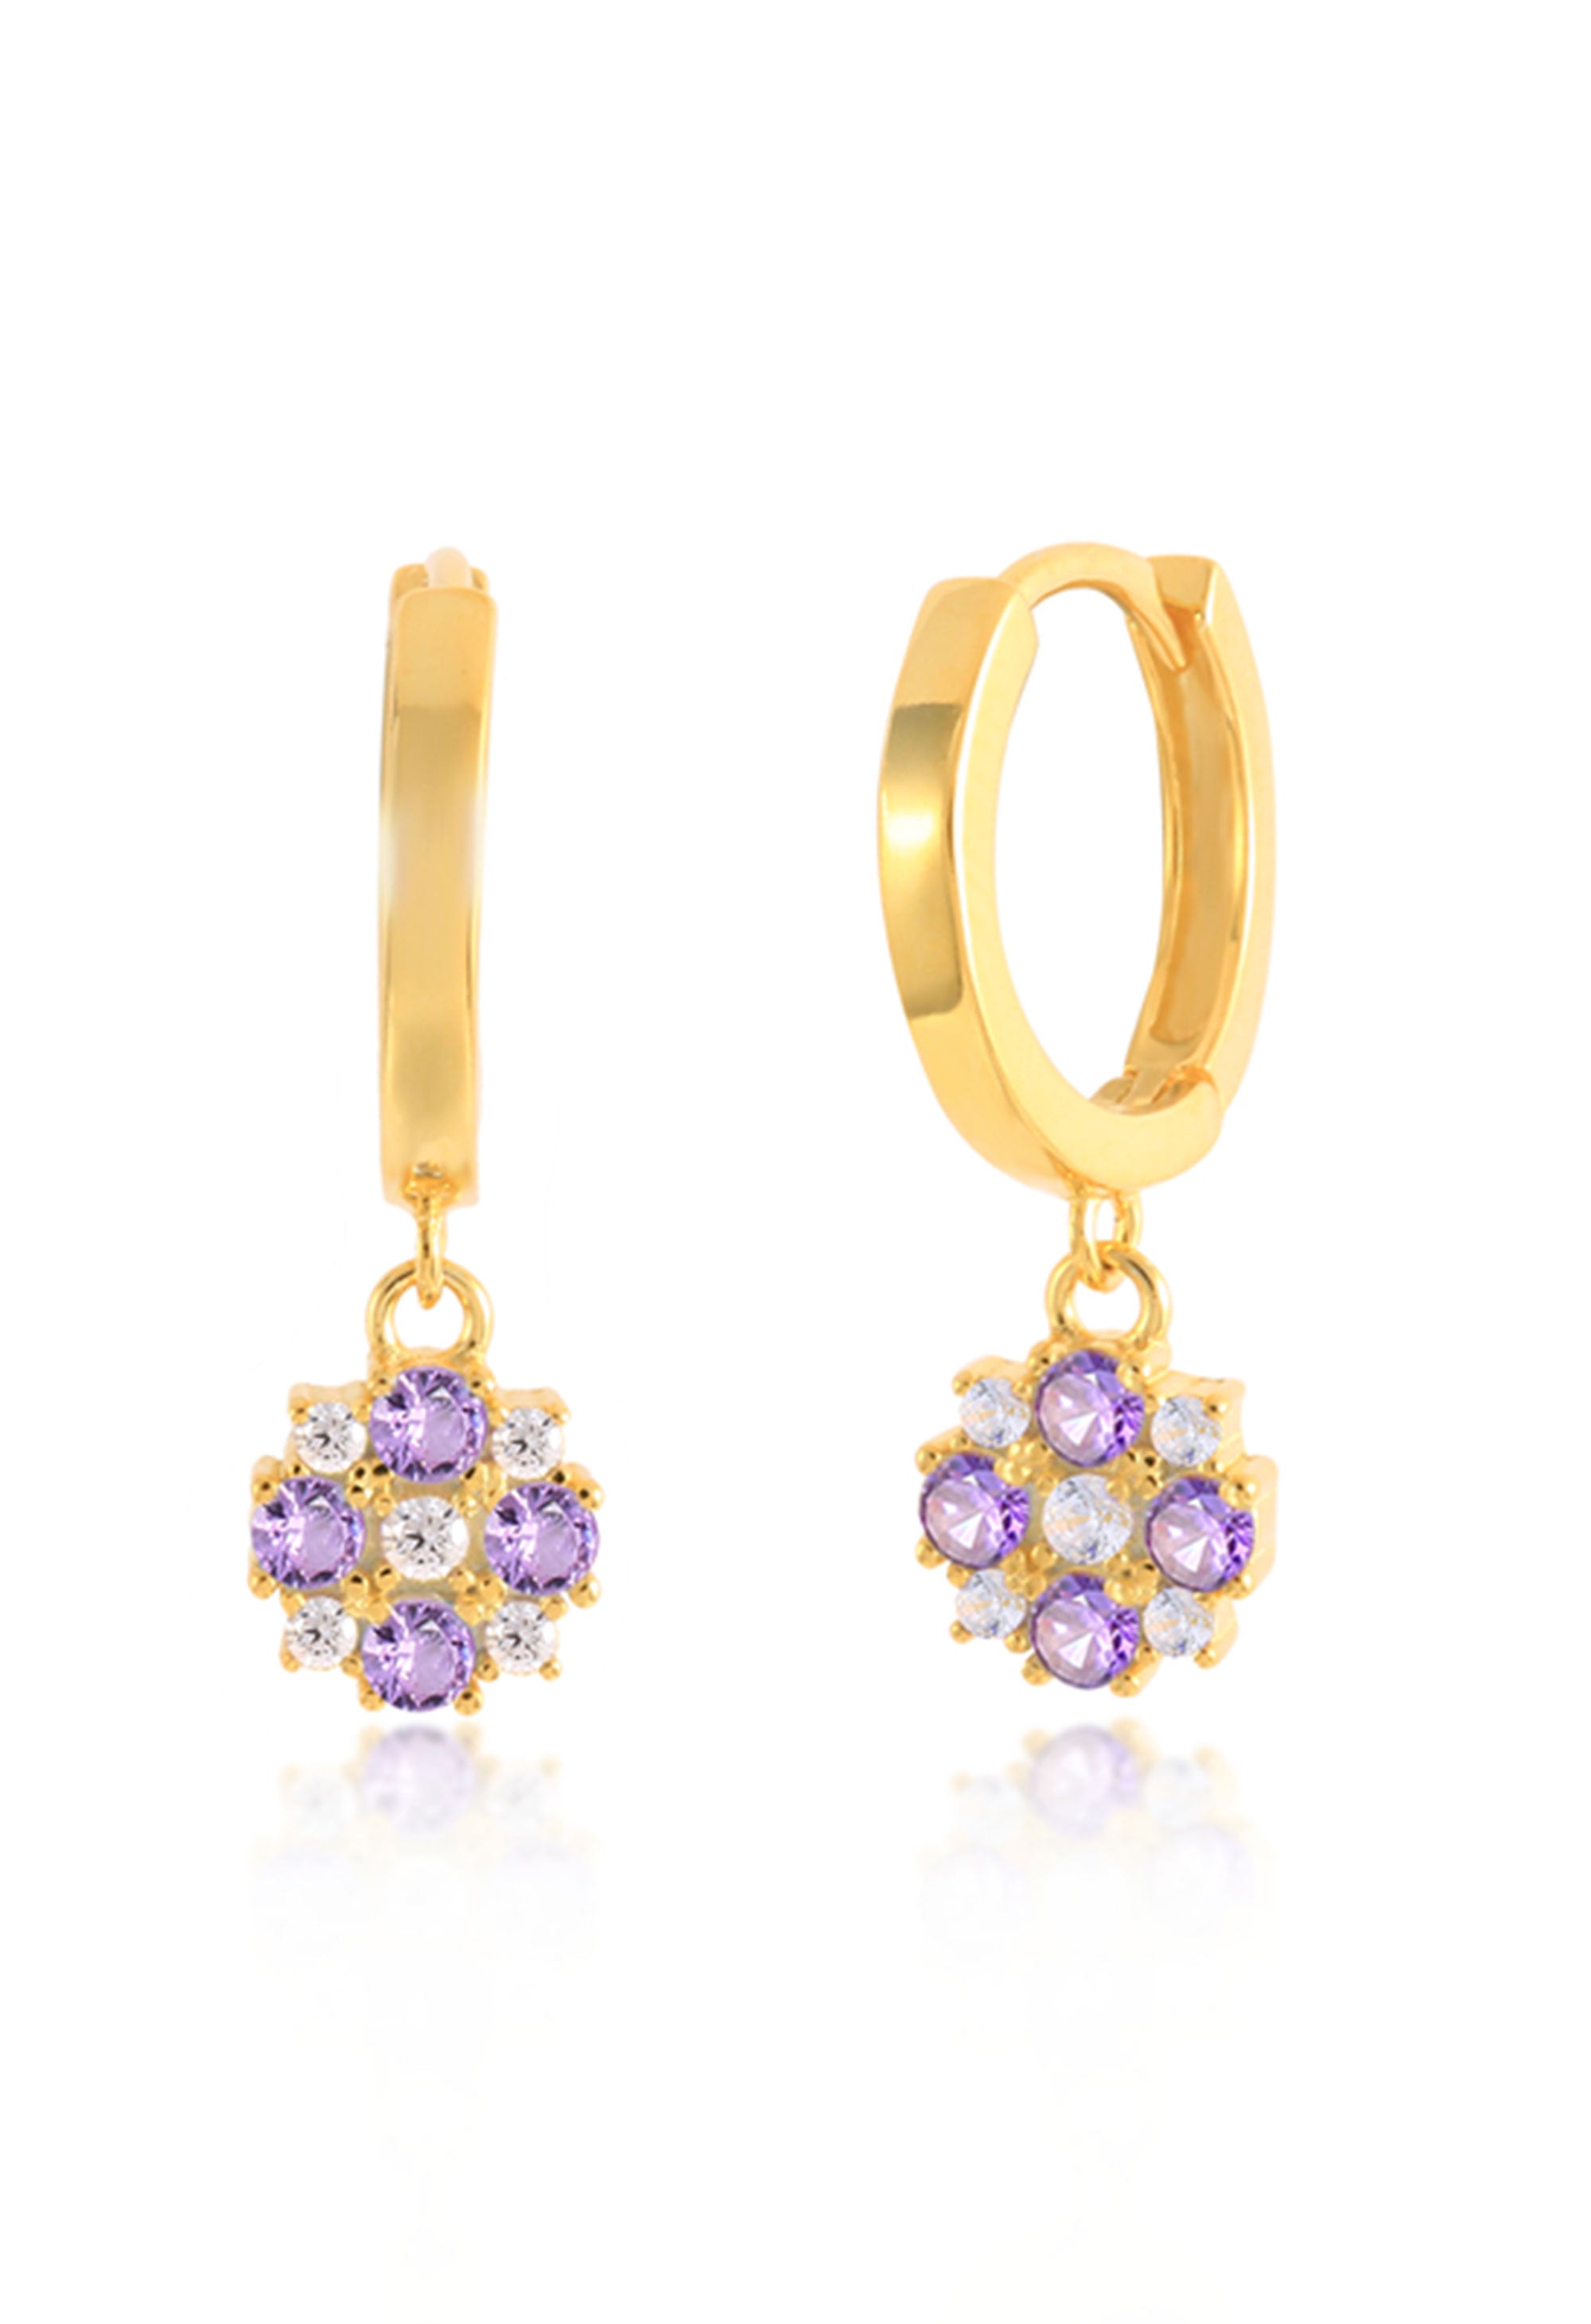 gold hoop earrings with purple and white flower drop charm